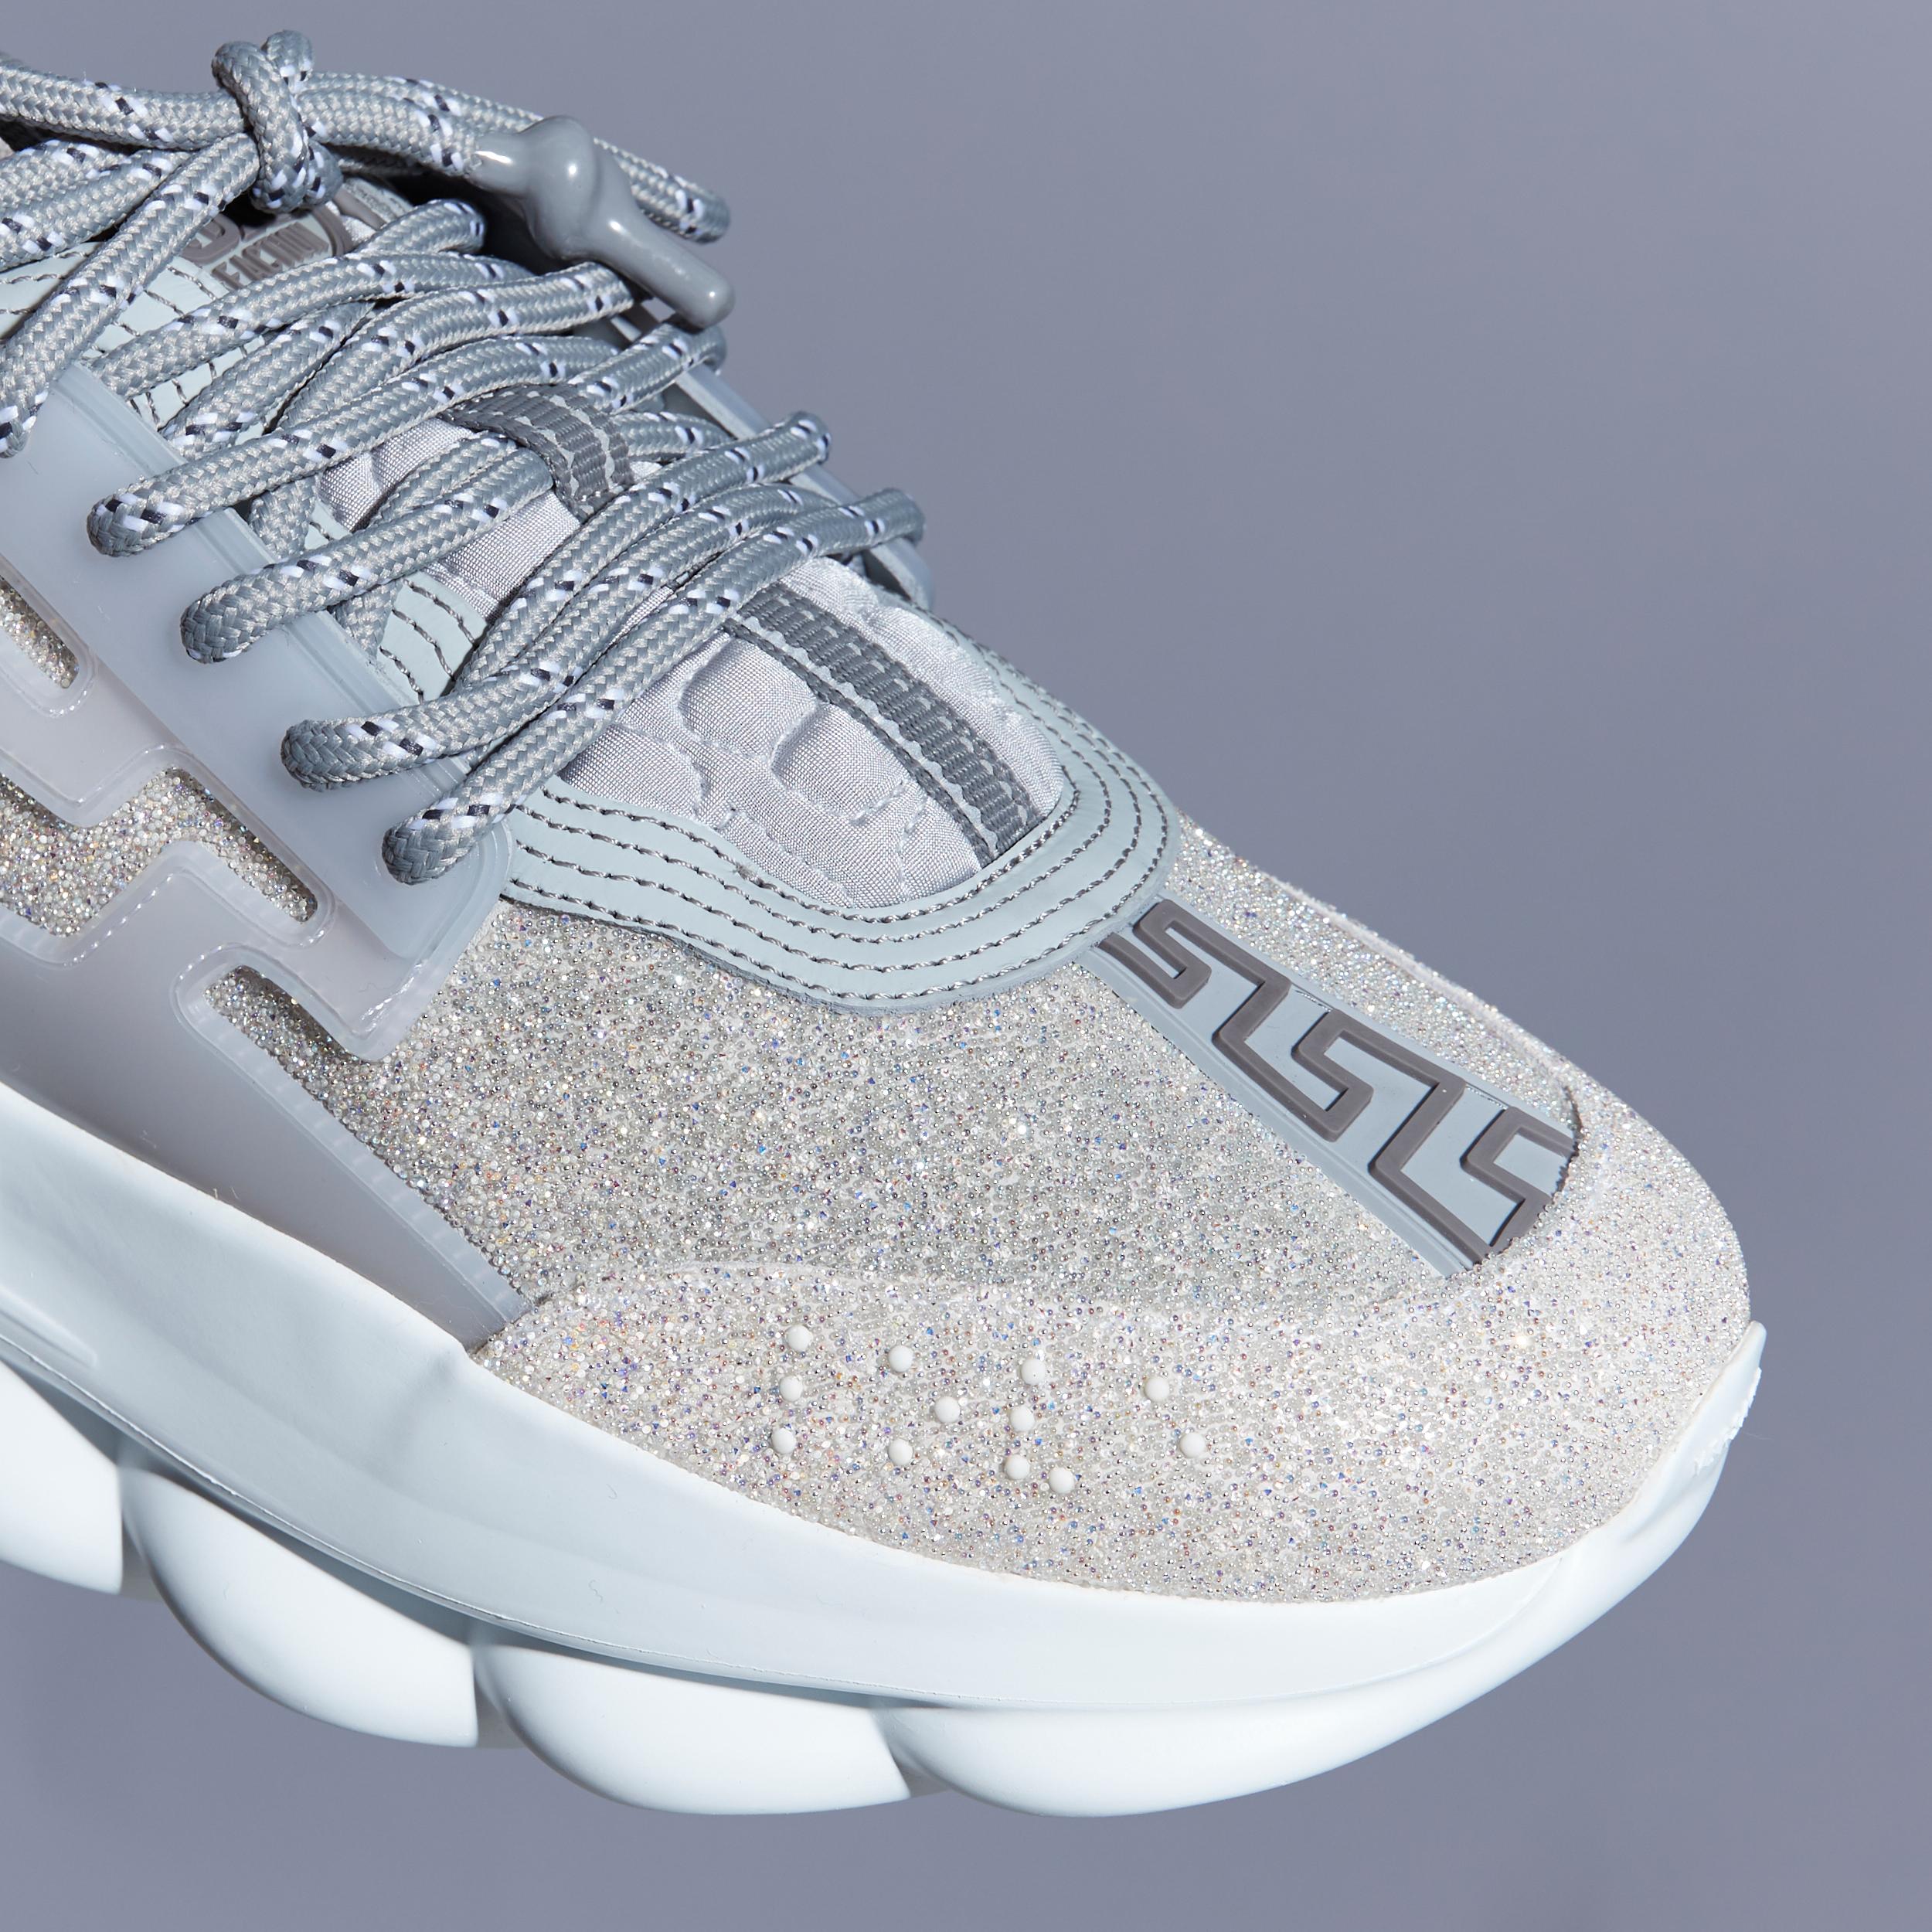 new VERSACE Chain Reaction Reflective Silver Crystal Rhinestone sneaker EU41 US8 For Sale 1